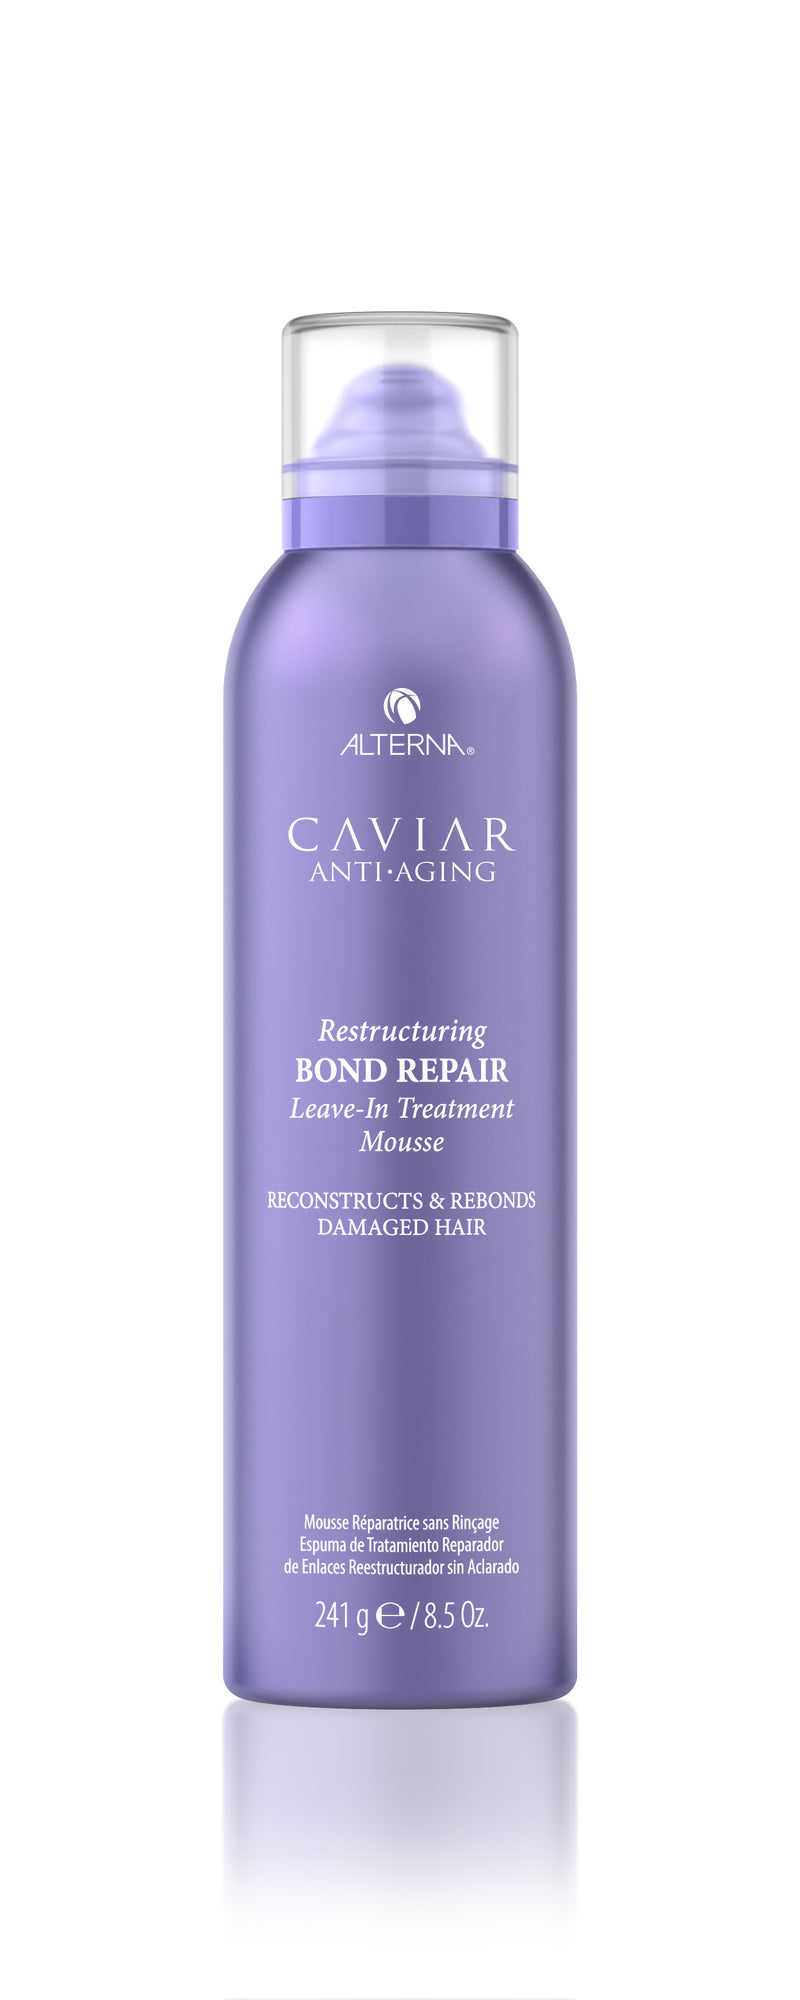 CAVIAR ANTI-AGING RESTRUCTURING BOND REPAIR LEAVE-IN TREATMENT MOUSSE - Front Door Beauty